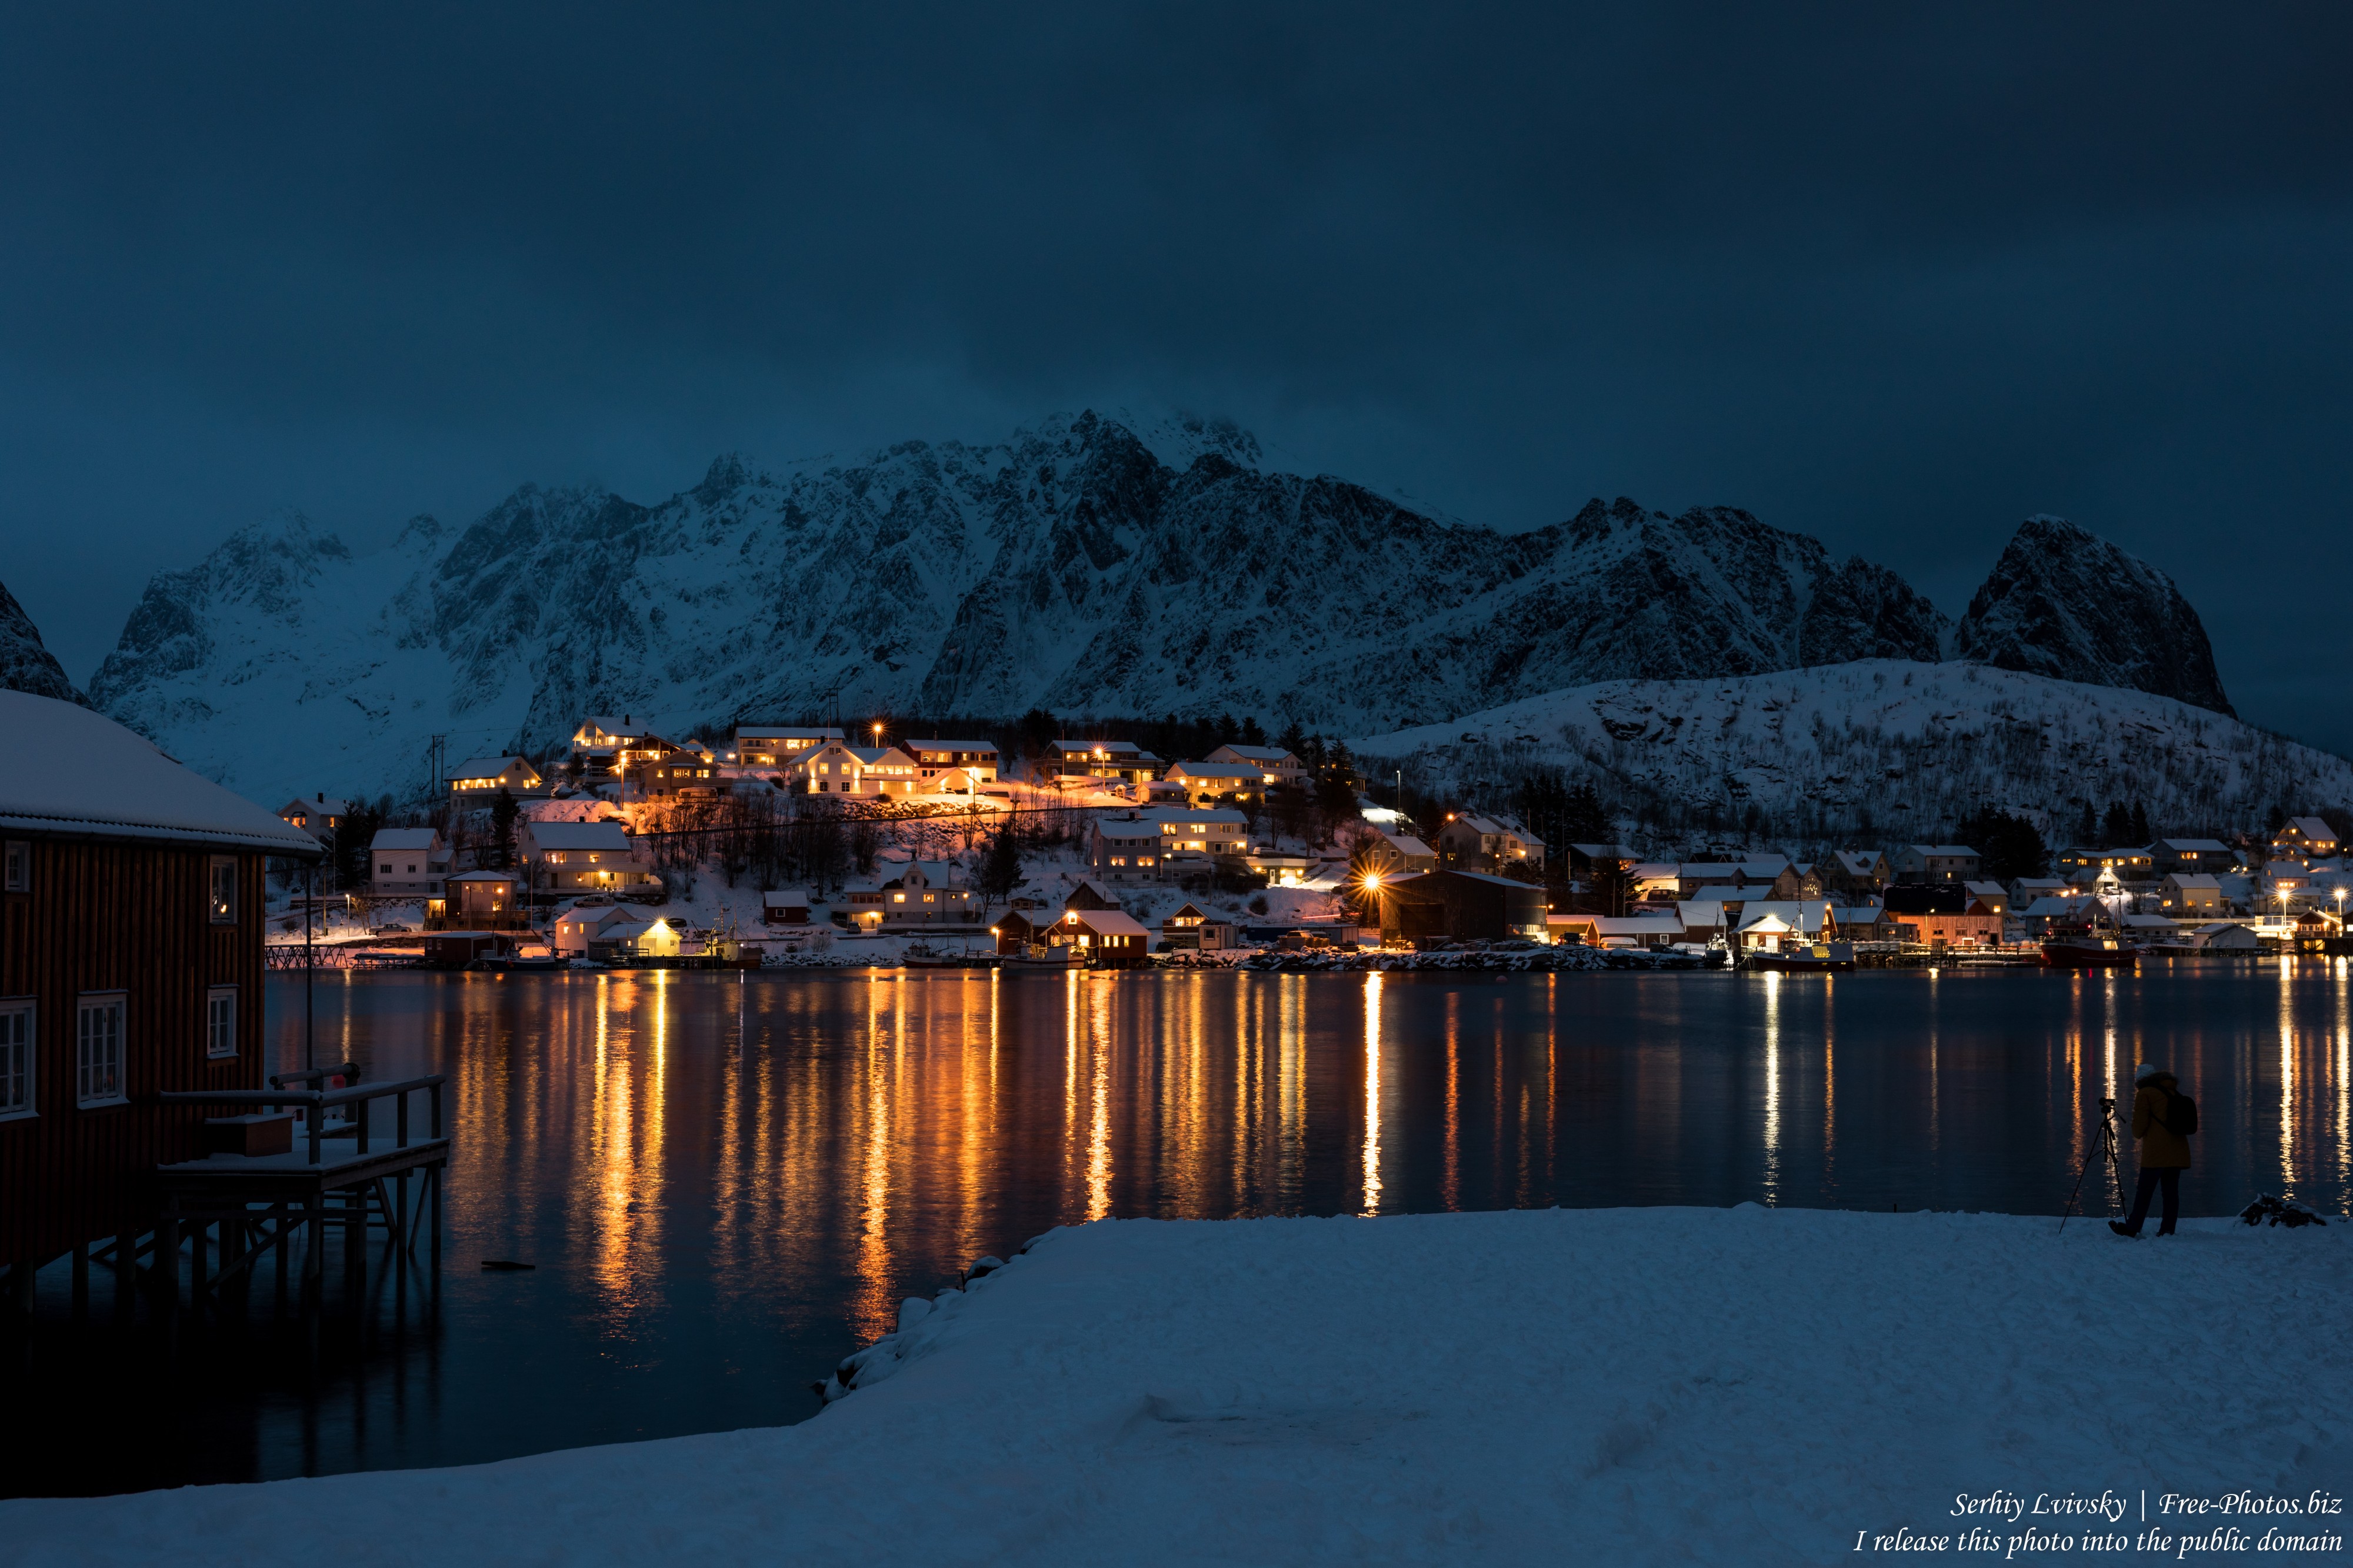 Reine and surroundings, Norway, in February 2020, by Serhiy Lvivsky, picture 13